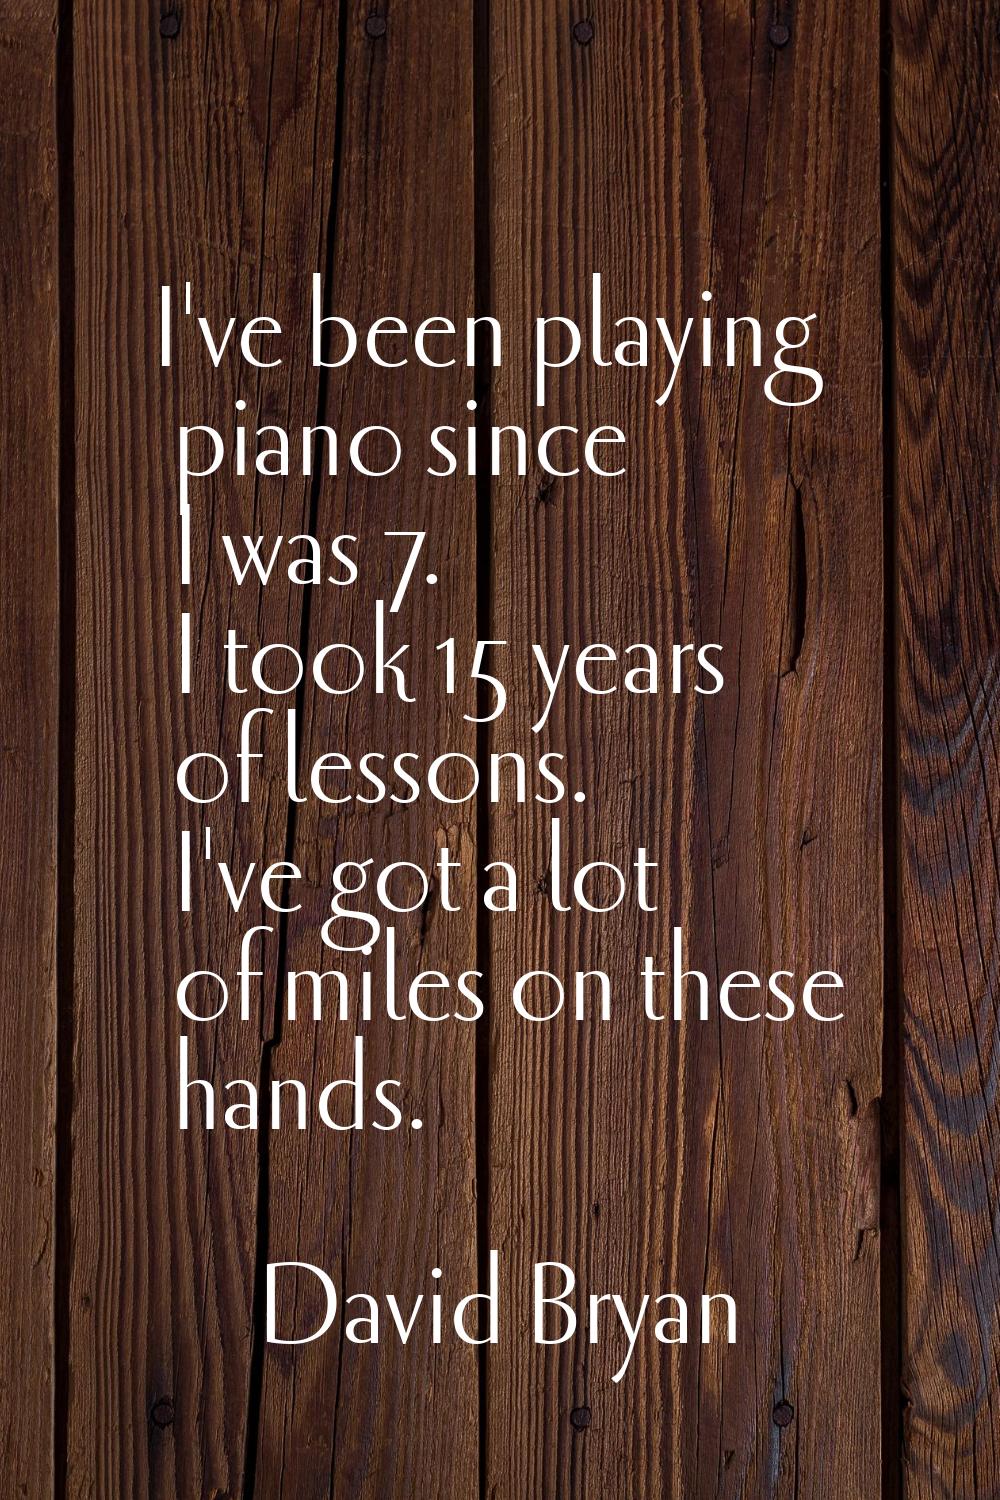 I've been playing piano since I was 7. I took 15 years of lessons. I've got a lot of miles on these